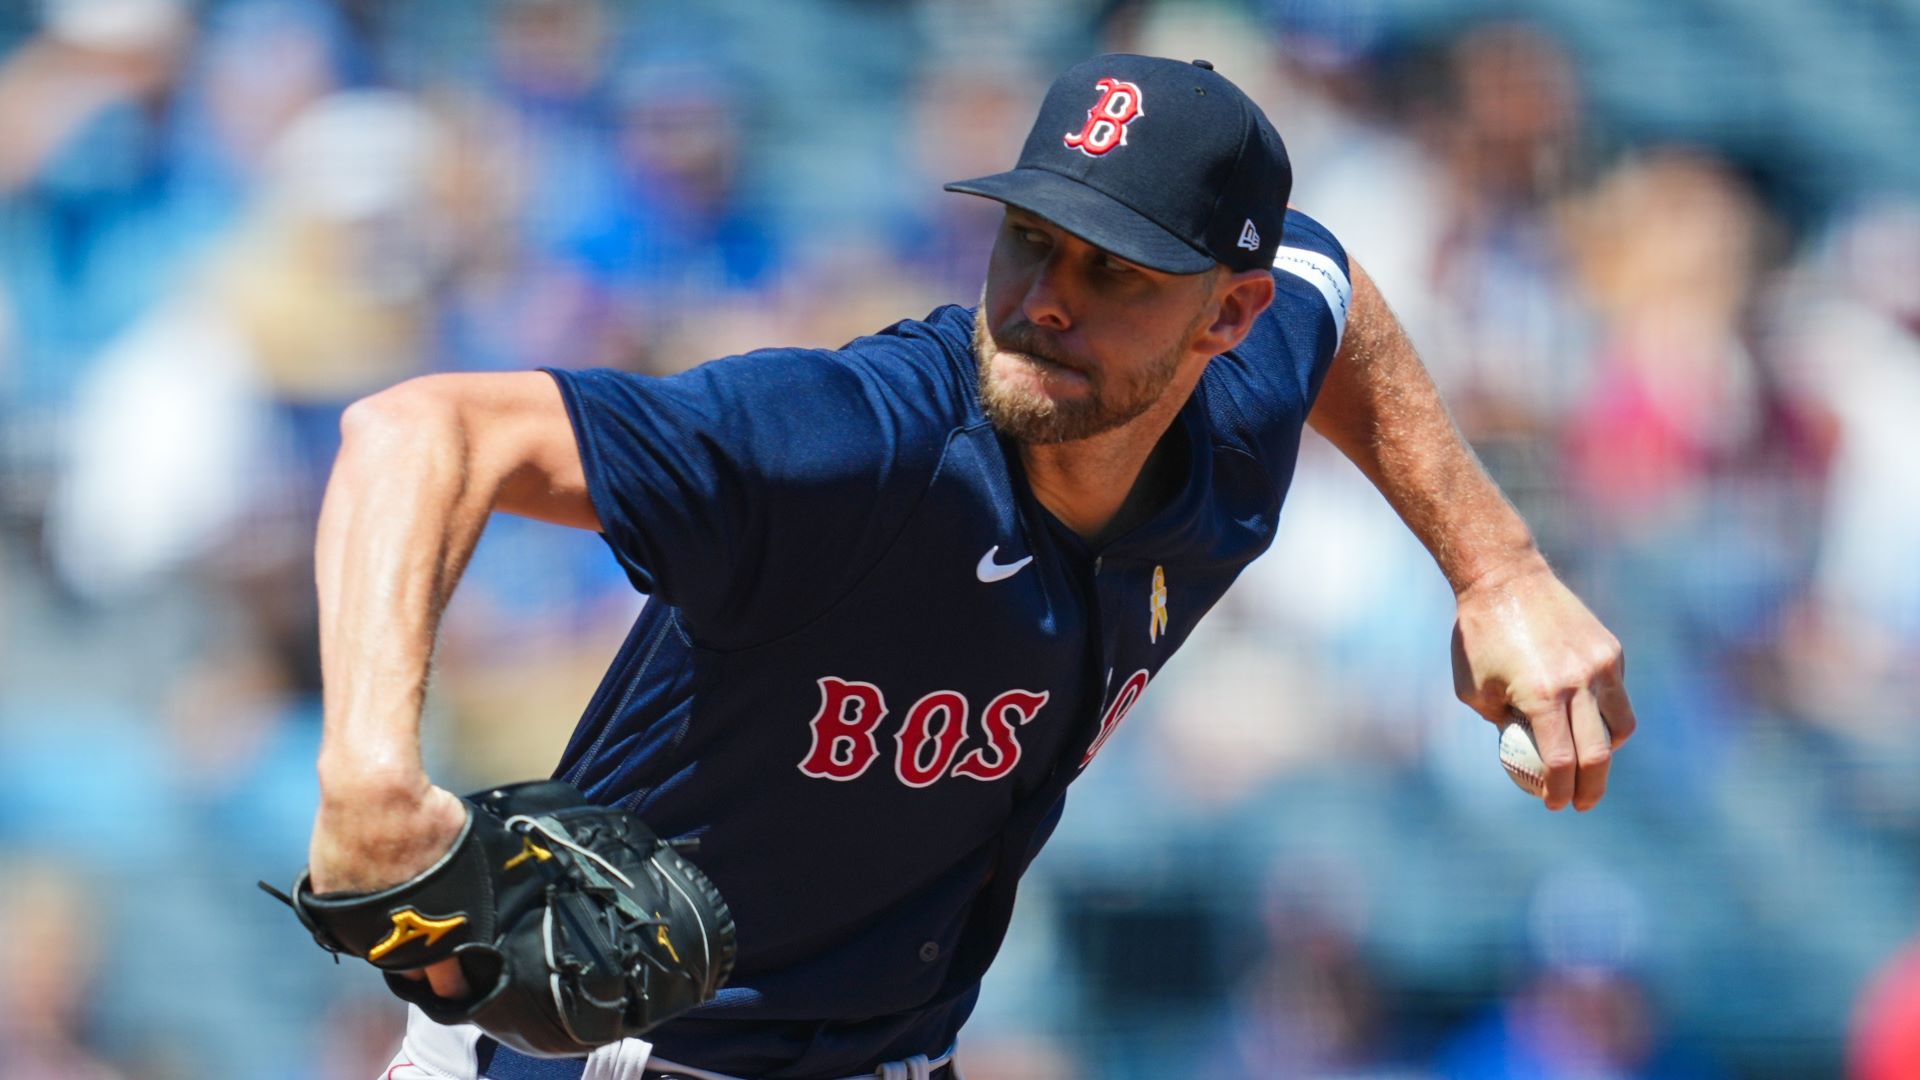 Red Sox Notes: Chris Sale Leads Durable Start For Boston